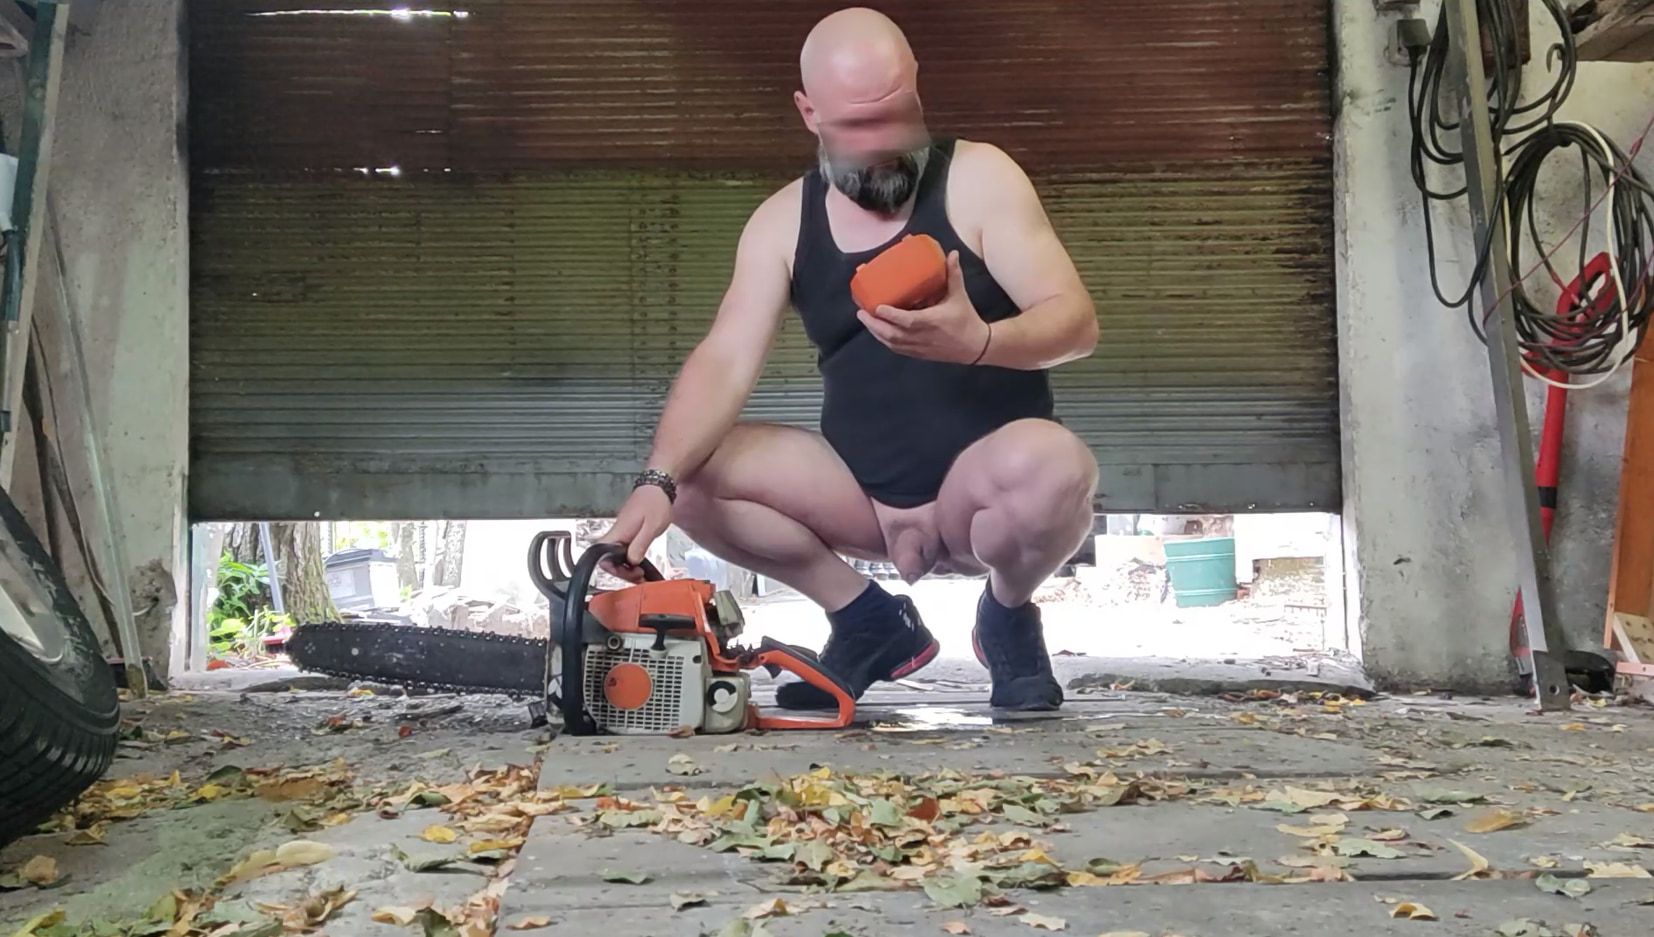  I'm trying to fix a chainsaw naked in the garage and I'm pe